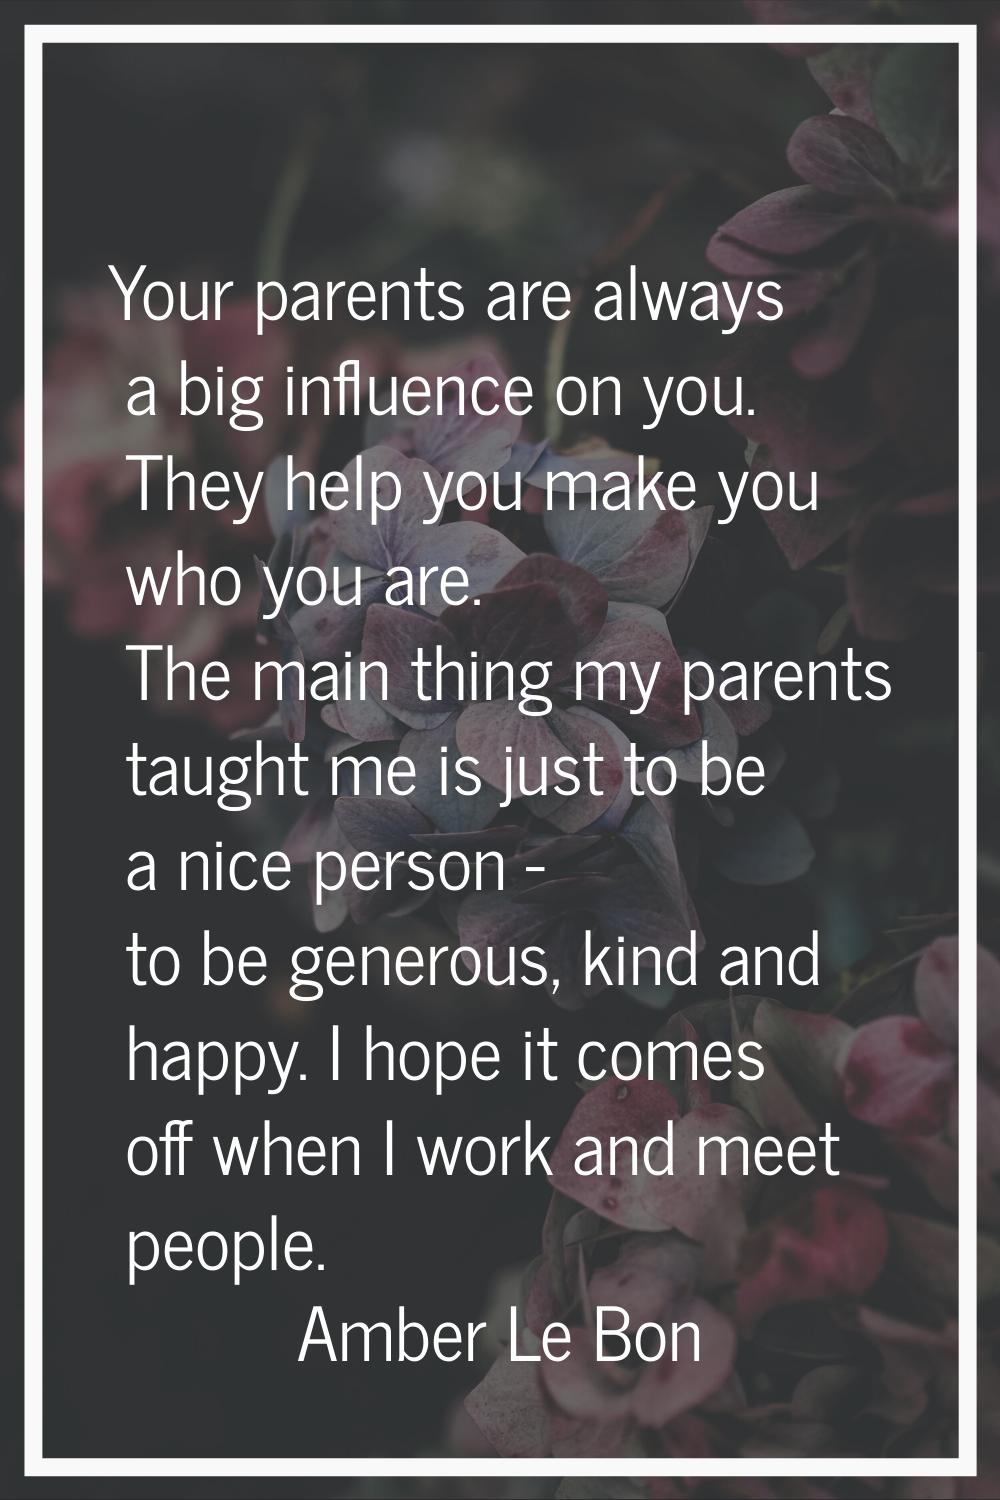 Your parents are always a big influence on you. They help you make you who you are. The main thing 